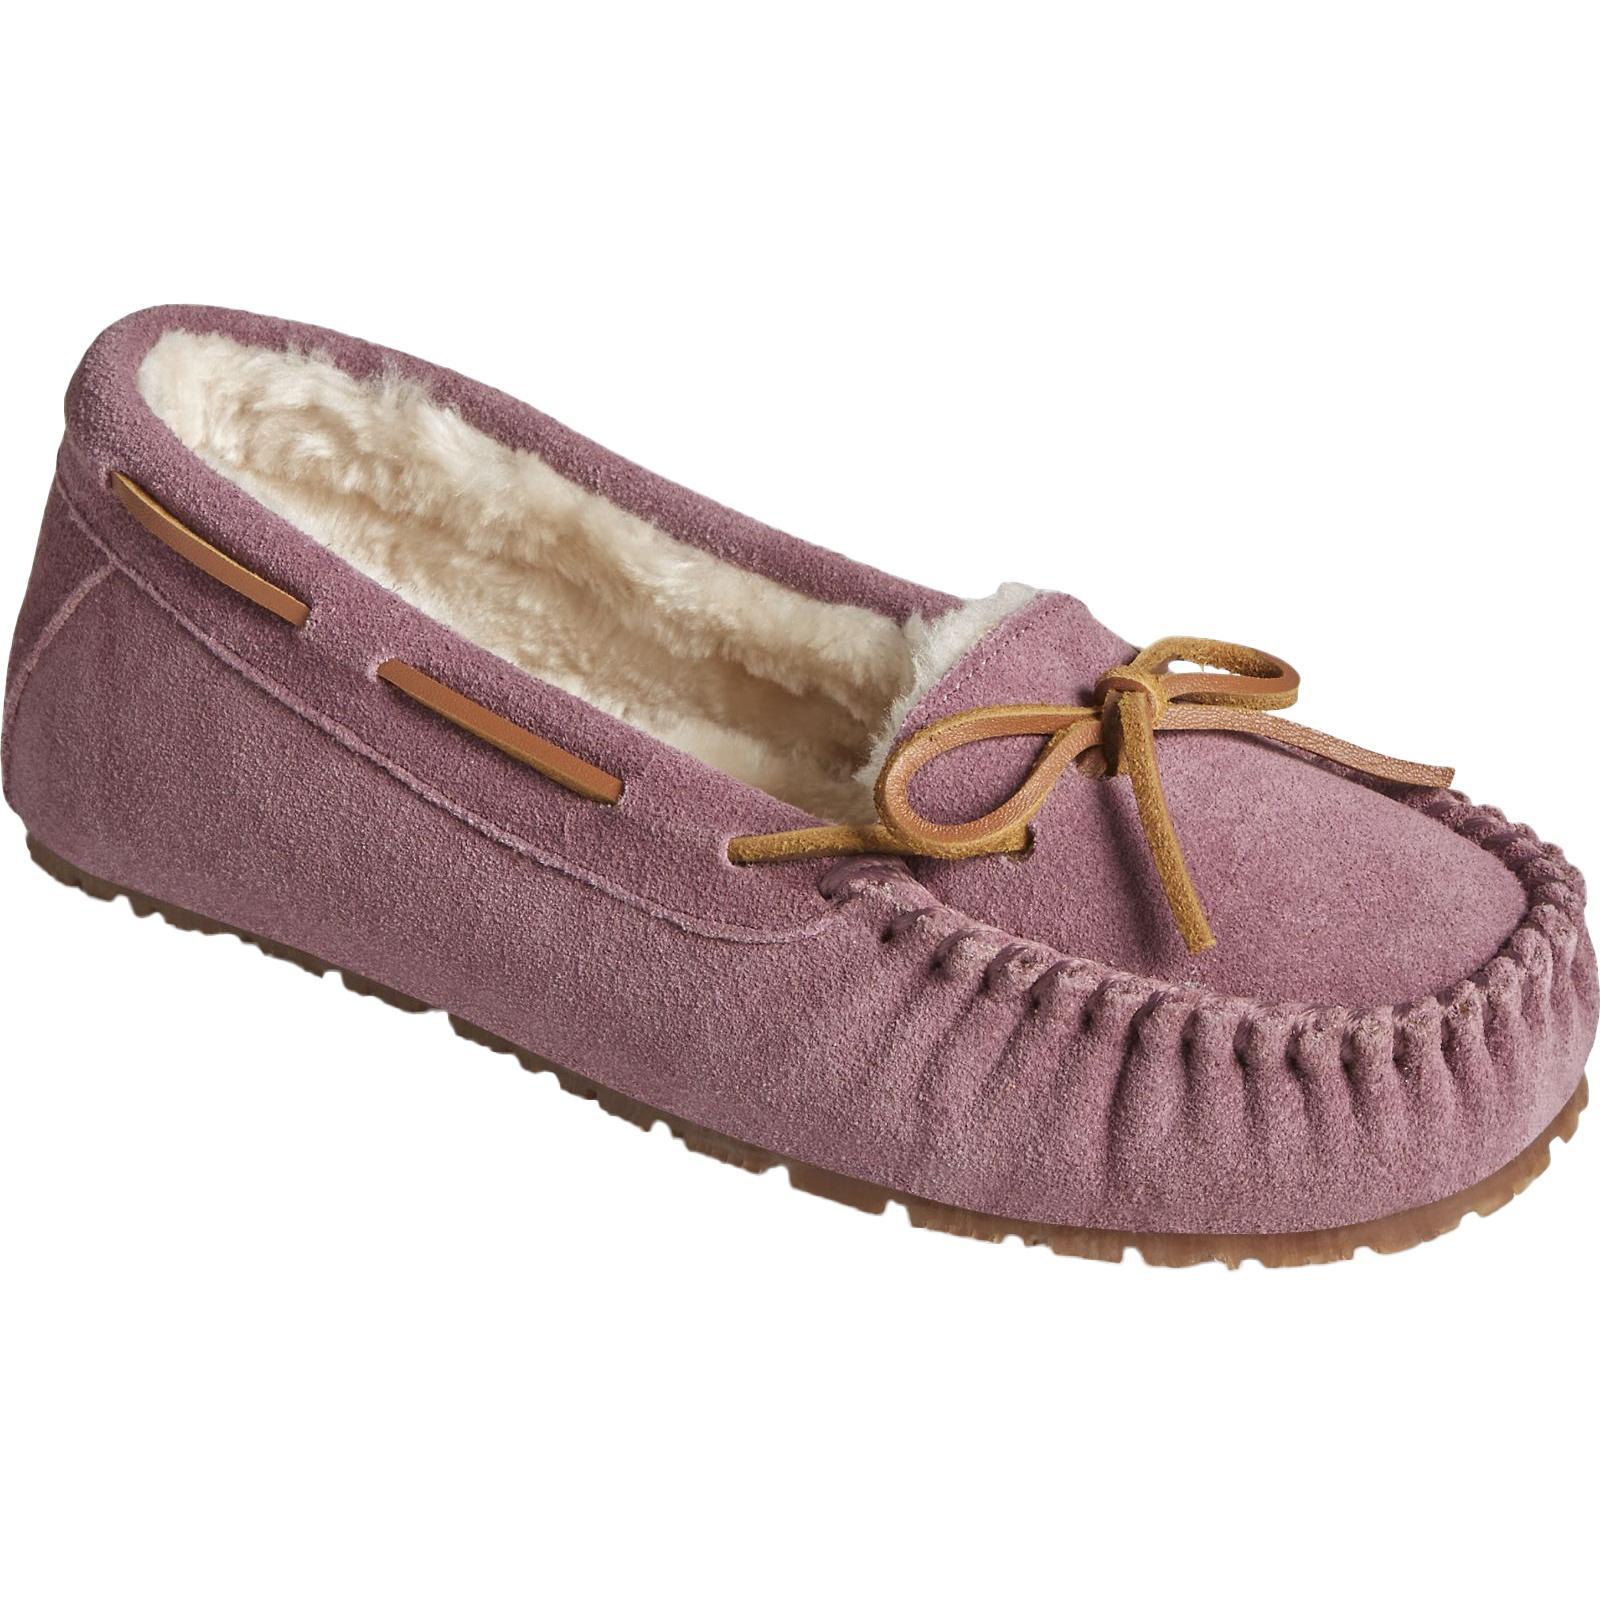 Sperry Womens/Ladies Reina Suede Slippers (Mauve) (9 UK)